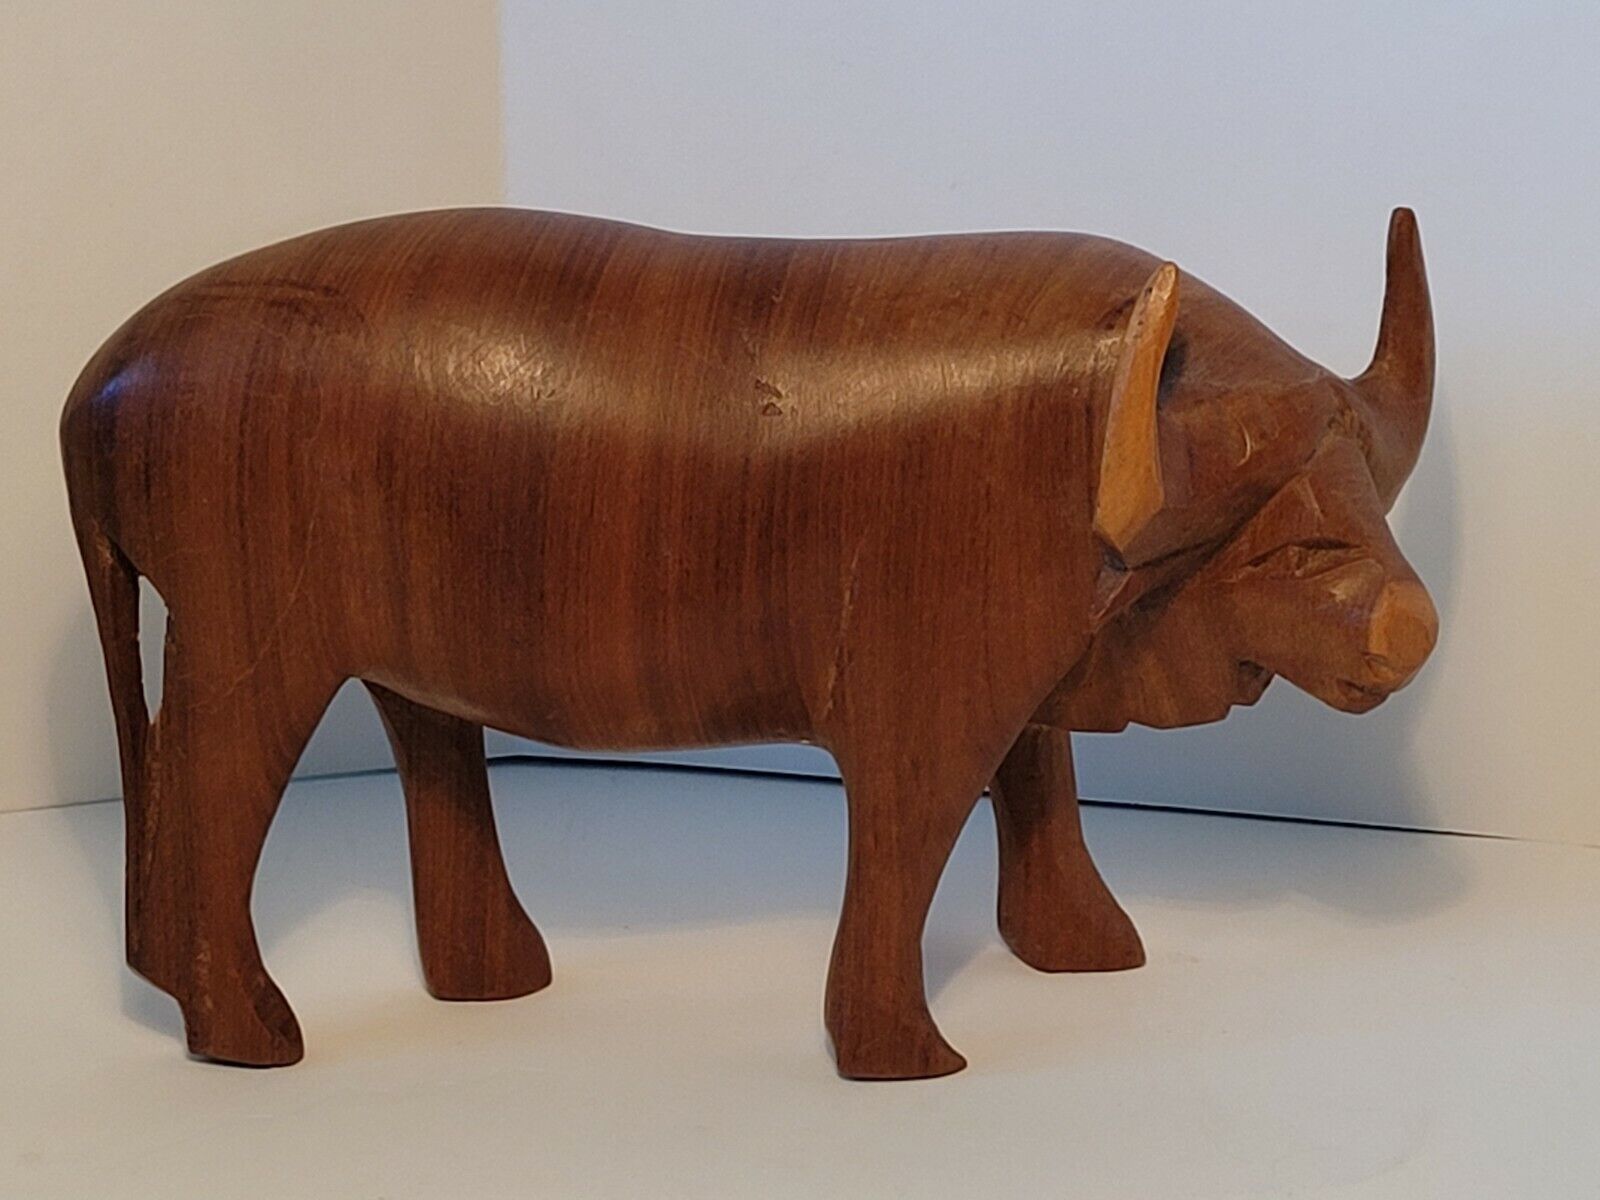 Carved Wooden African Water Buffalo Figurine Collectible Decor Animal